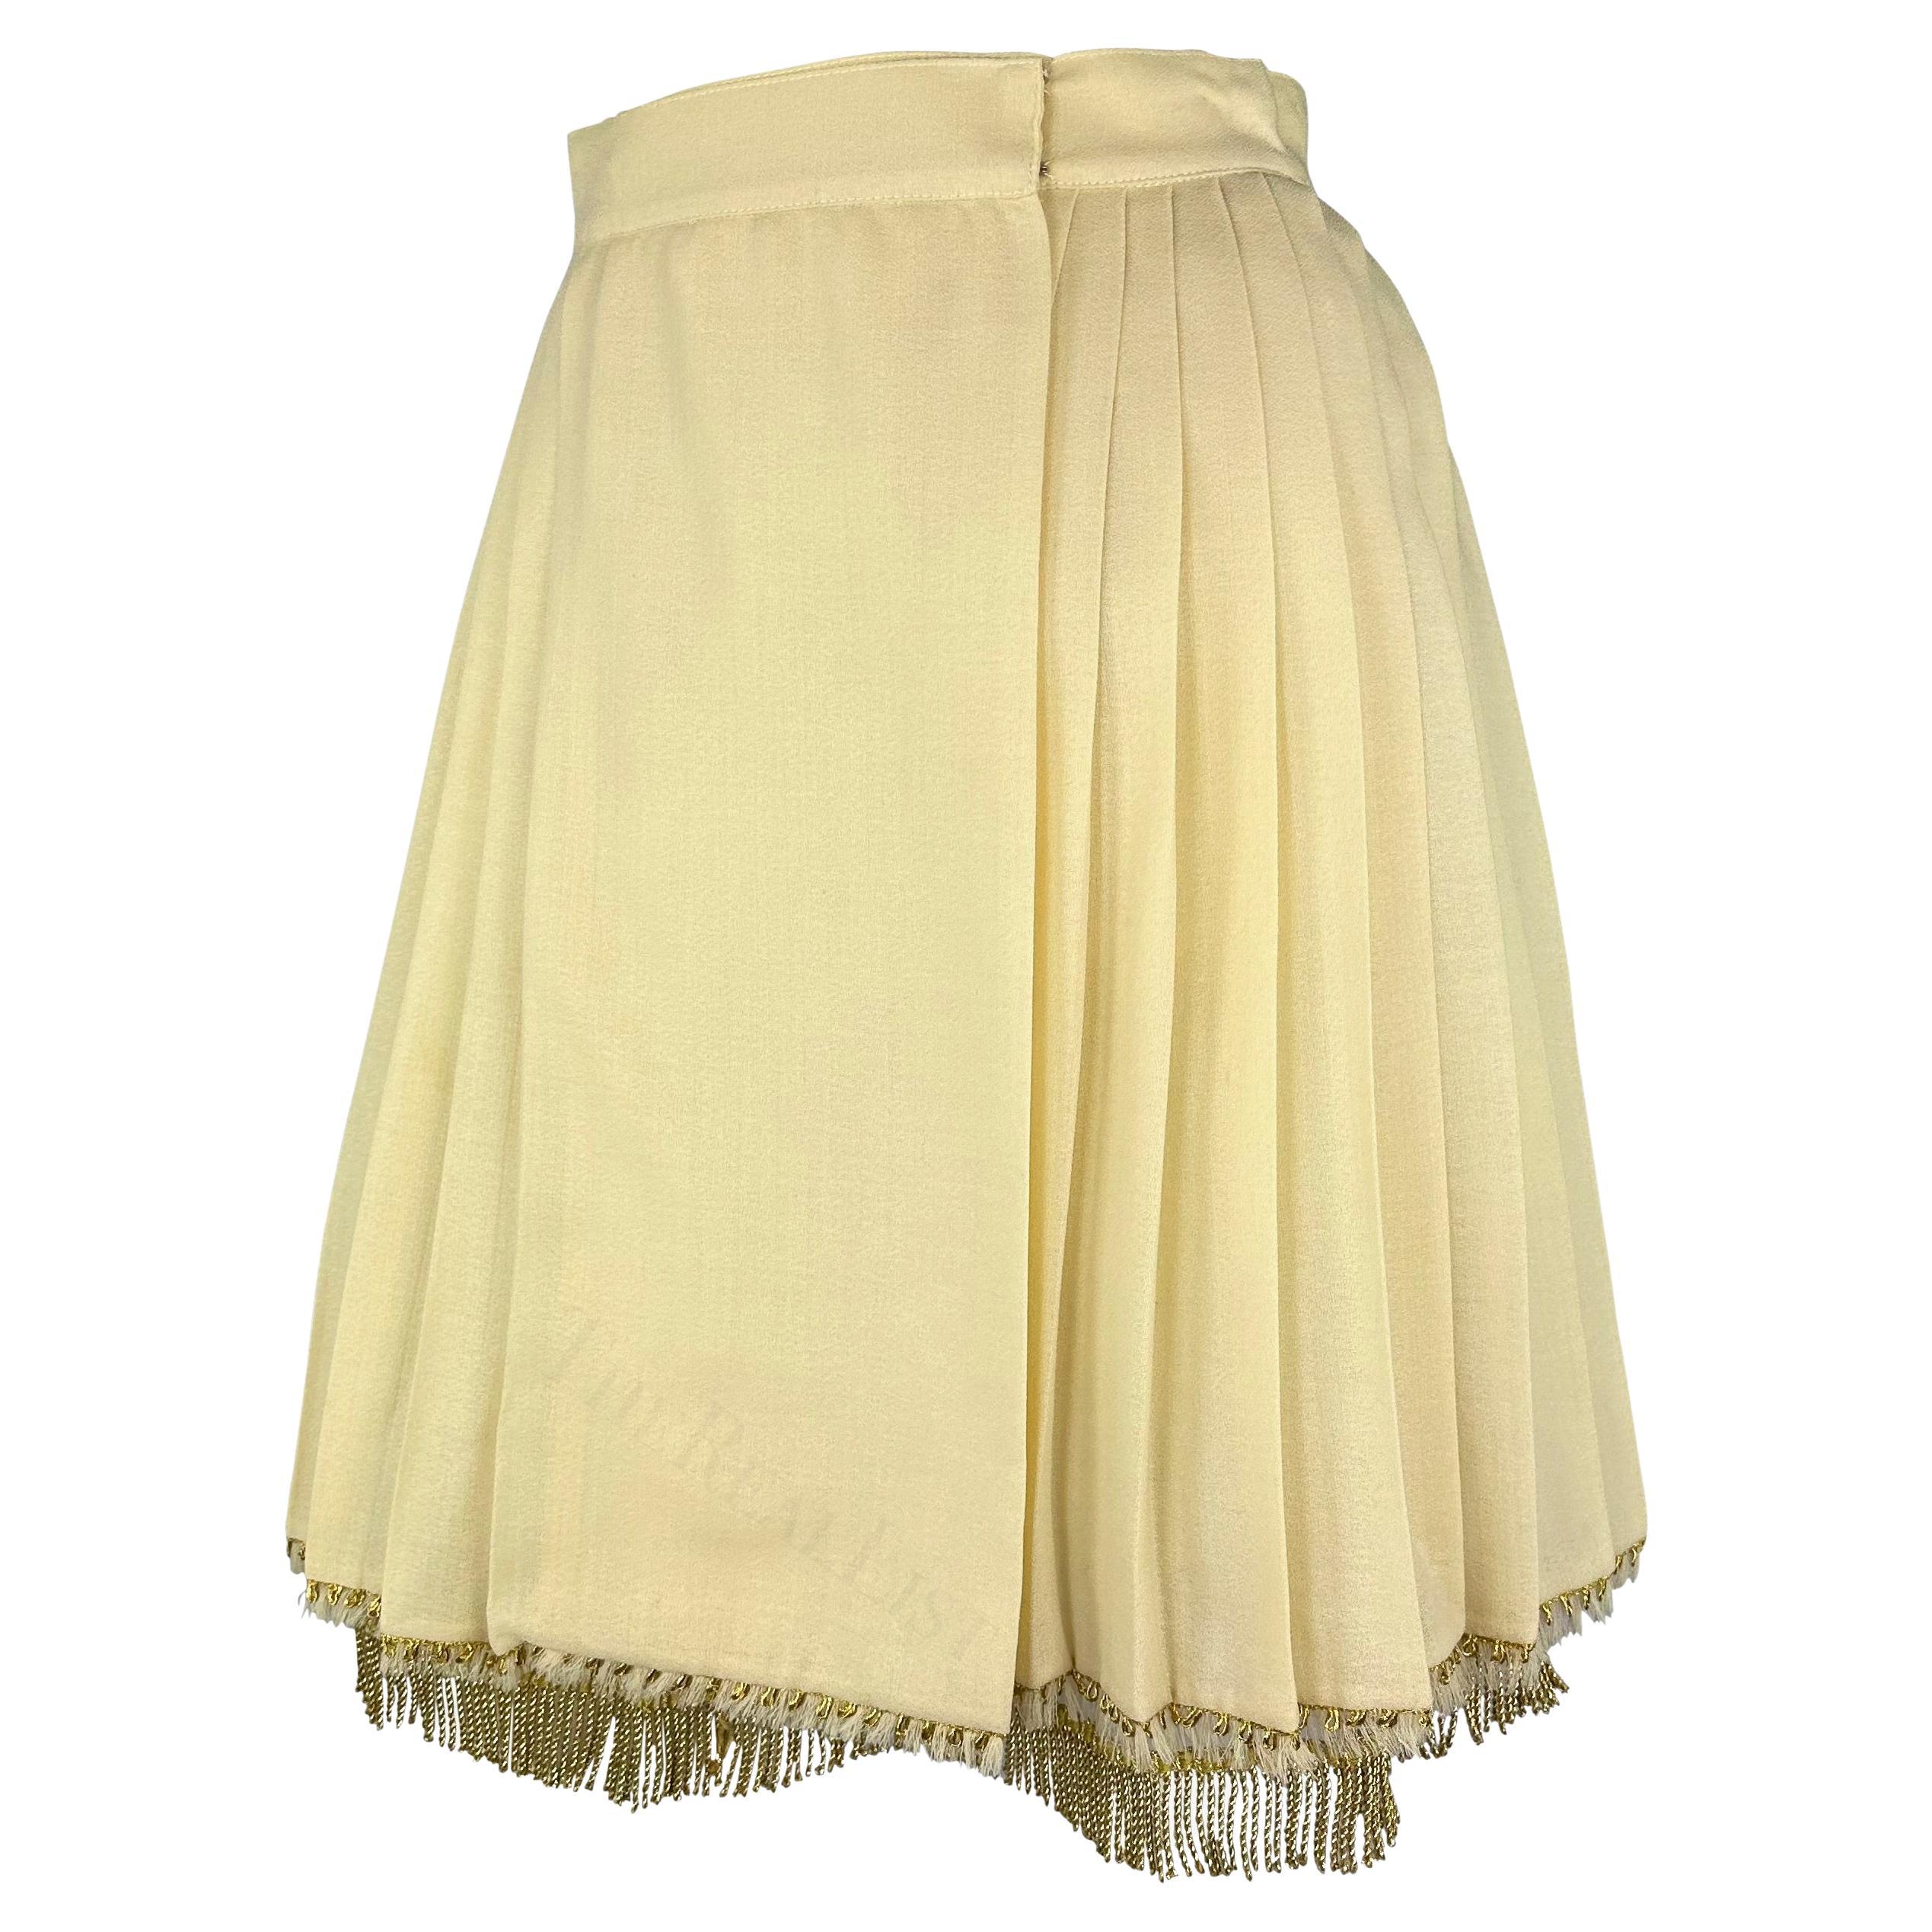 S/S 1992 Gianni Versace Couture Off-White Pleat Wrap Fringe Skirt Crinoline Set In Good Condition For Sale In West Hollywood, CA